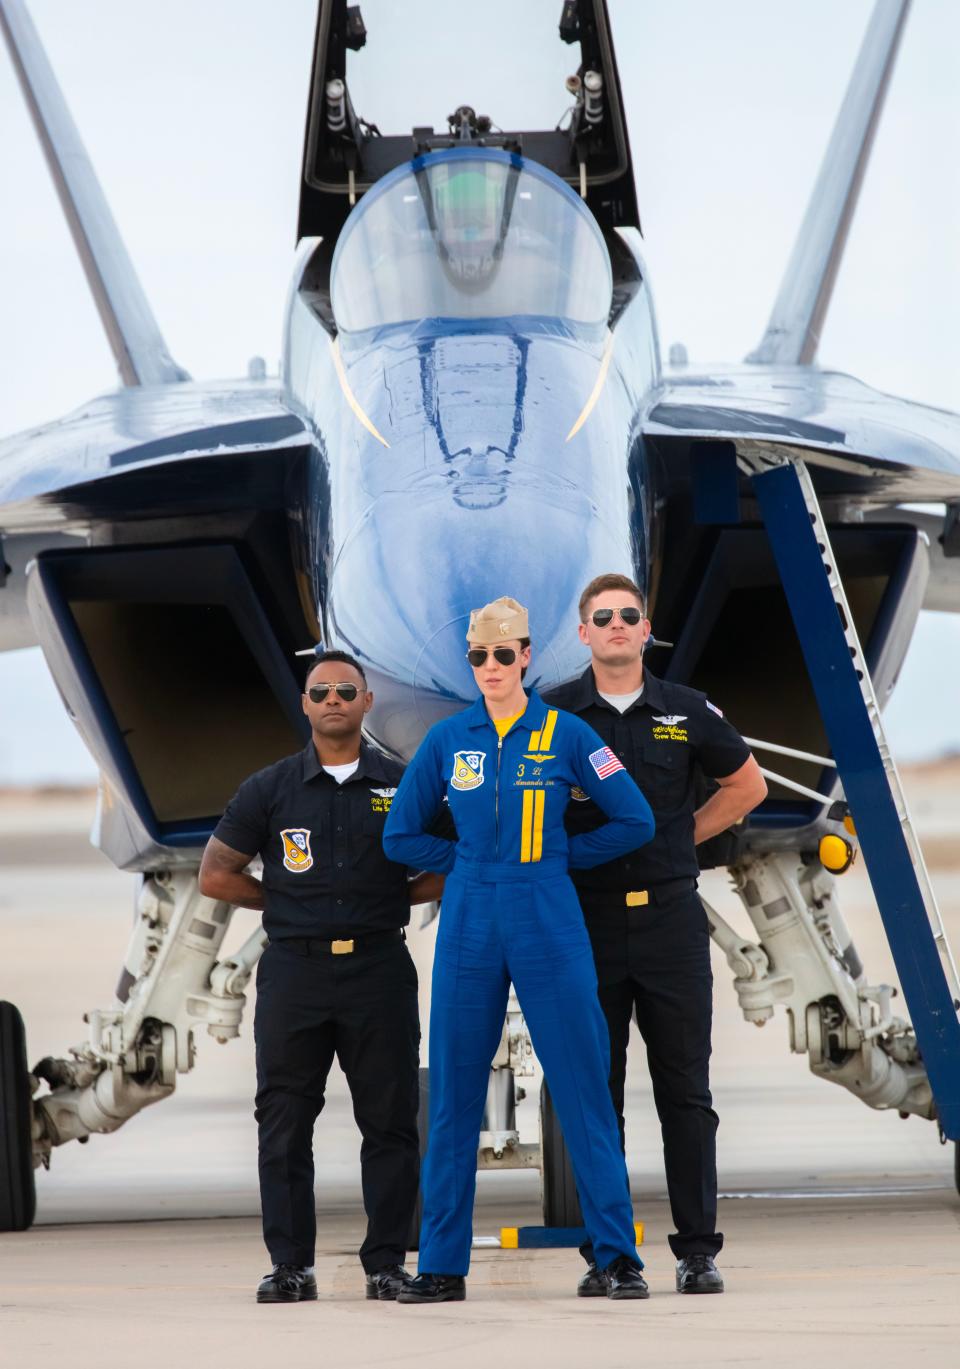 After completing her first public air show performance as a Blue Angel pilot, U.S. Navy Lt. Amanda Lee poses with her crew in front of her F/A-18E/F Super Hornet.